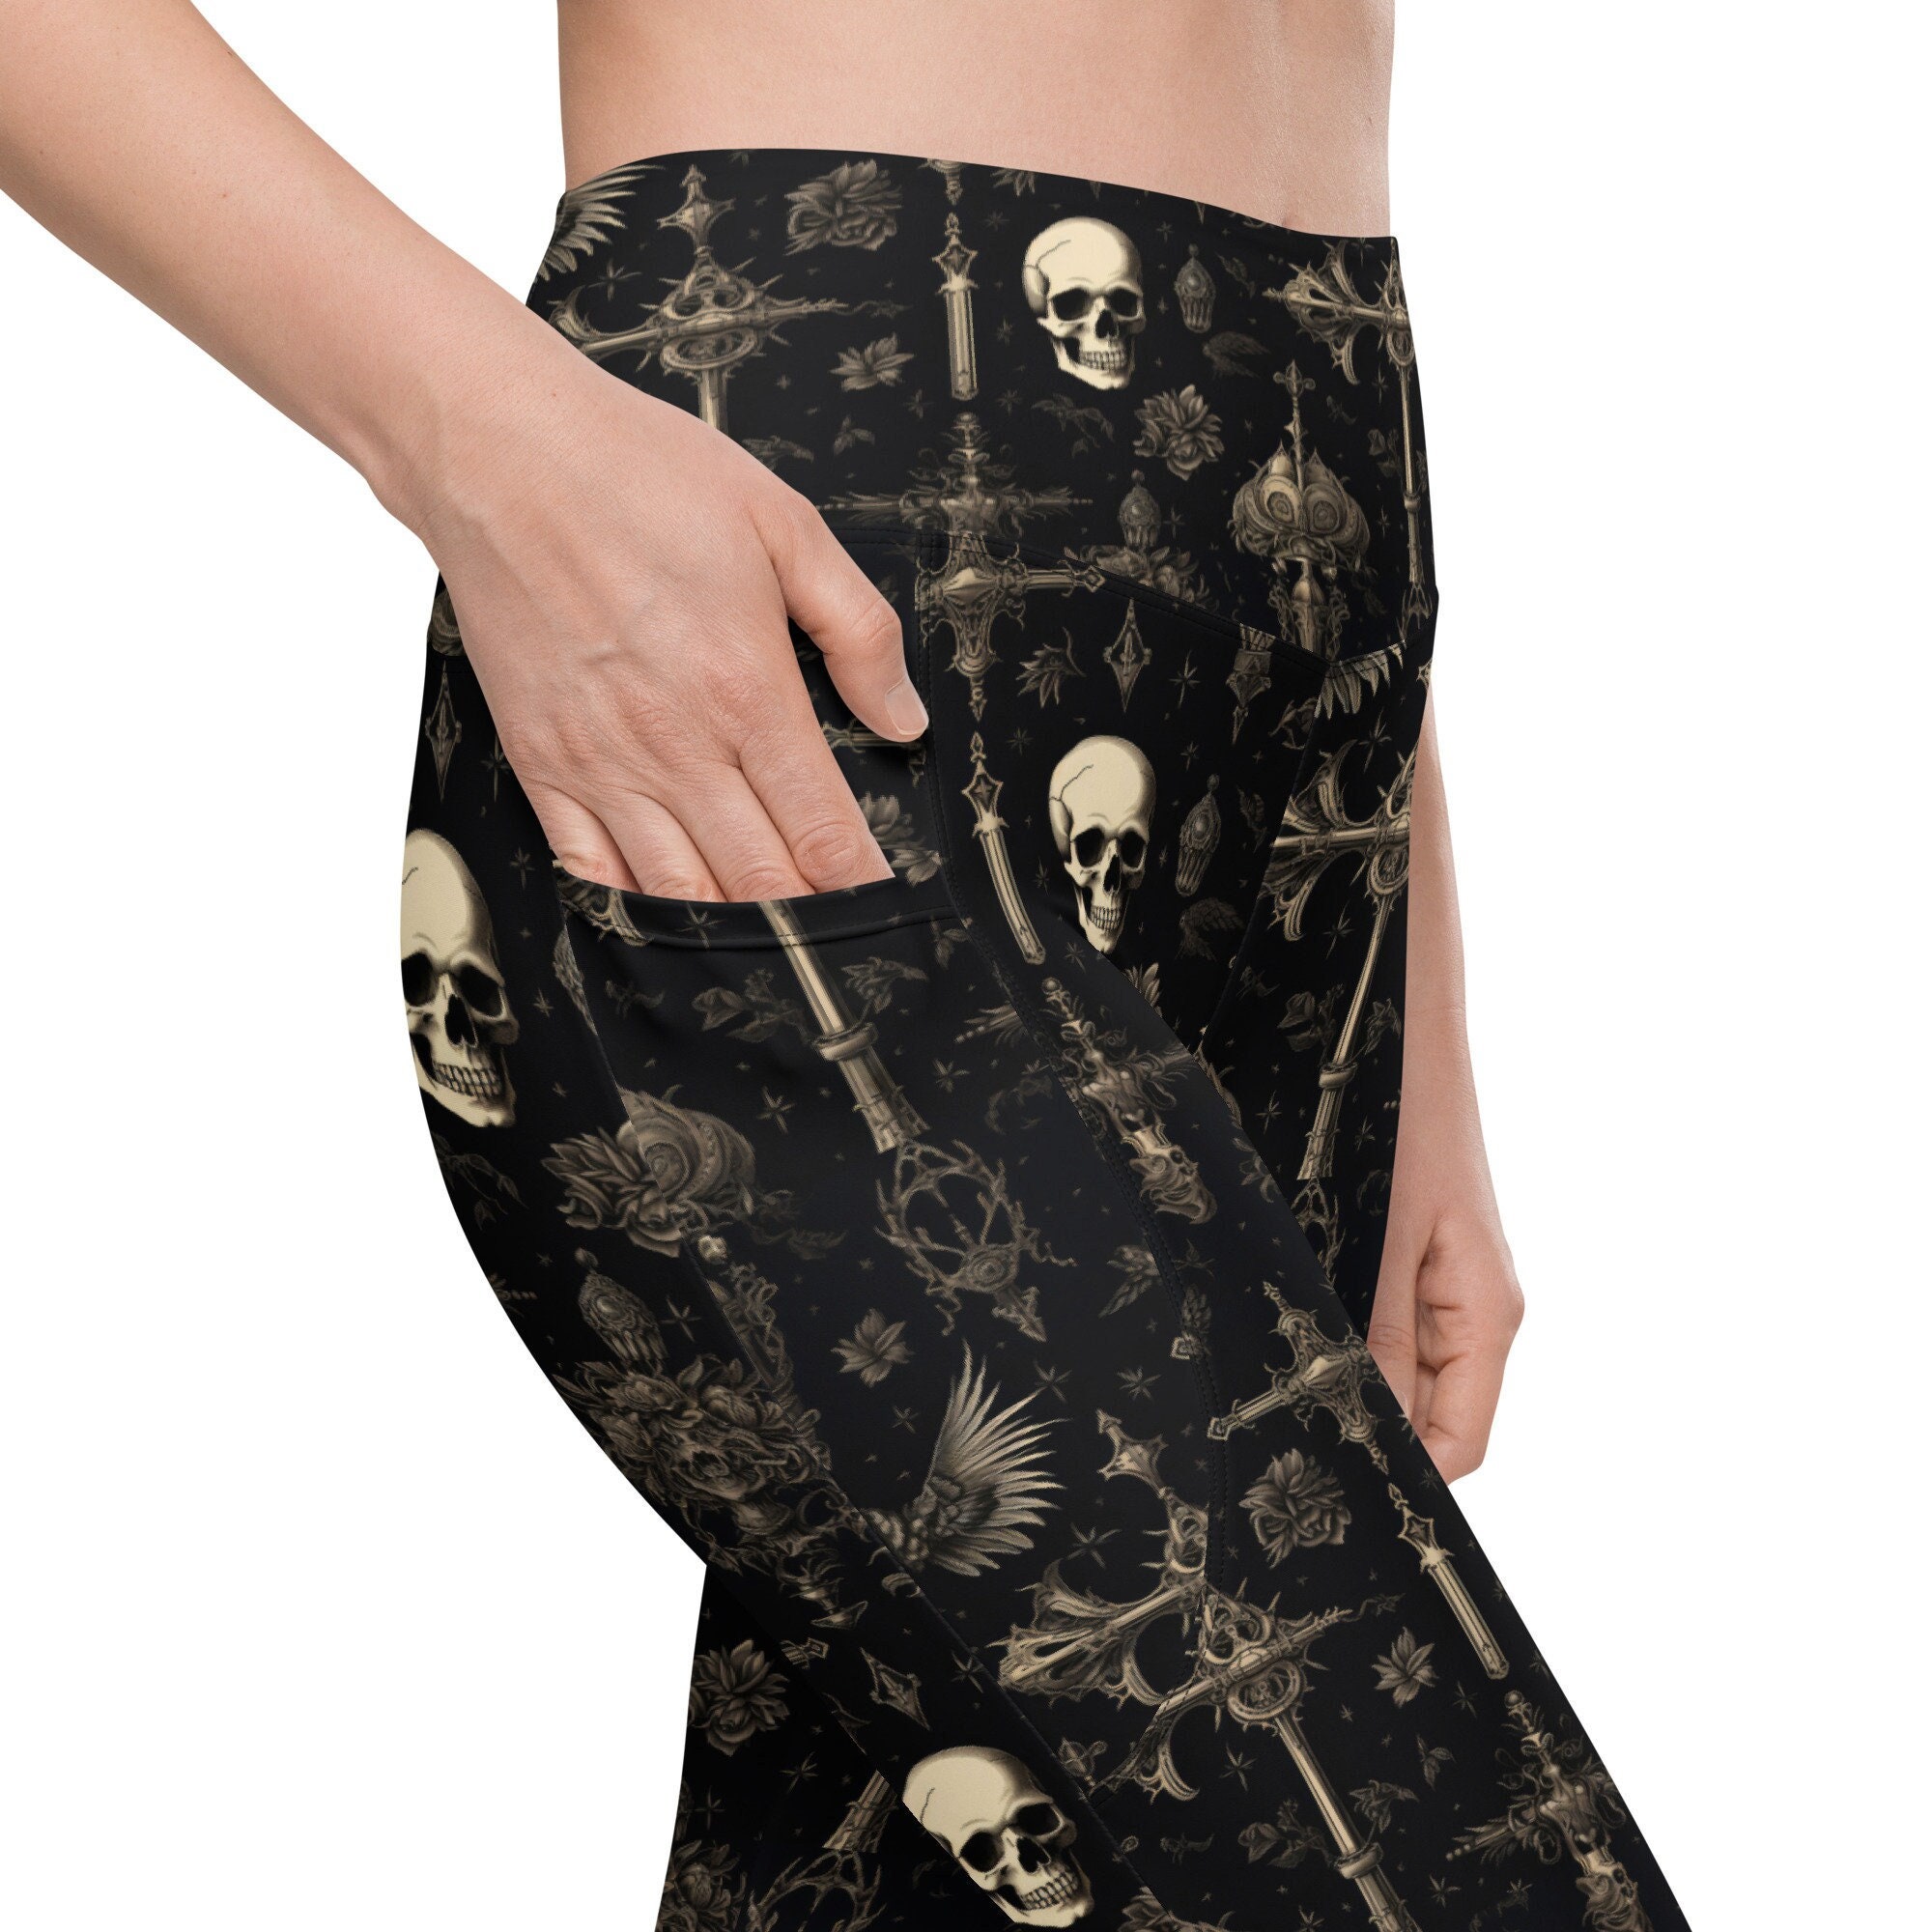 Vintage Goth Knitted Print Leggings With Pockets  Printed leggings, Pocket  leggings, Vintage goth